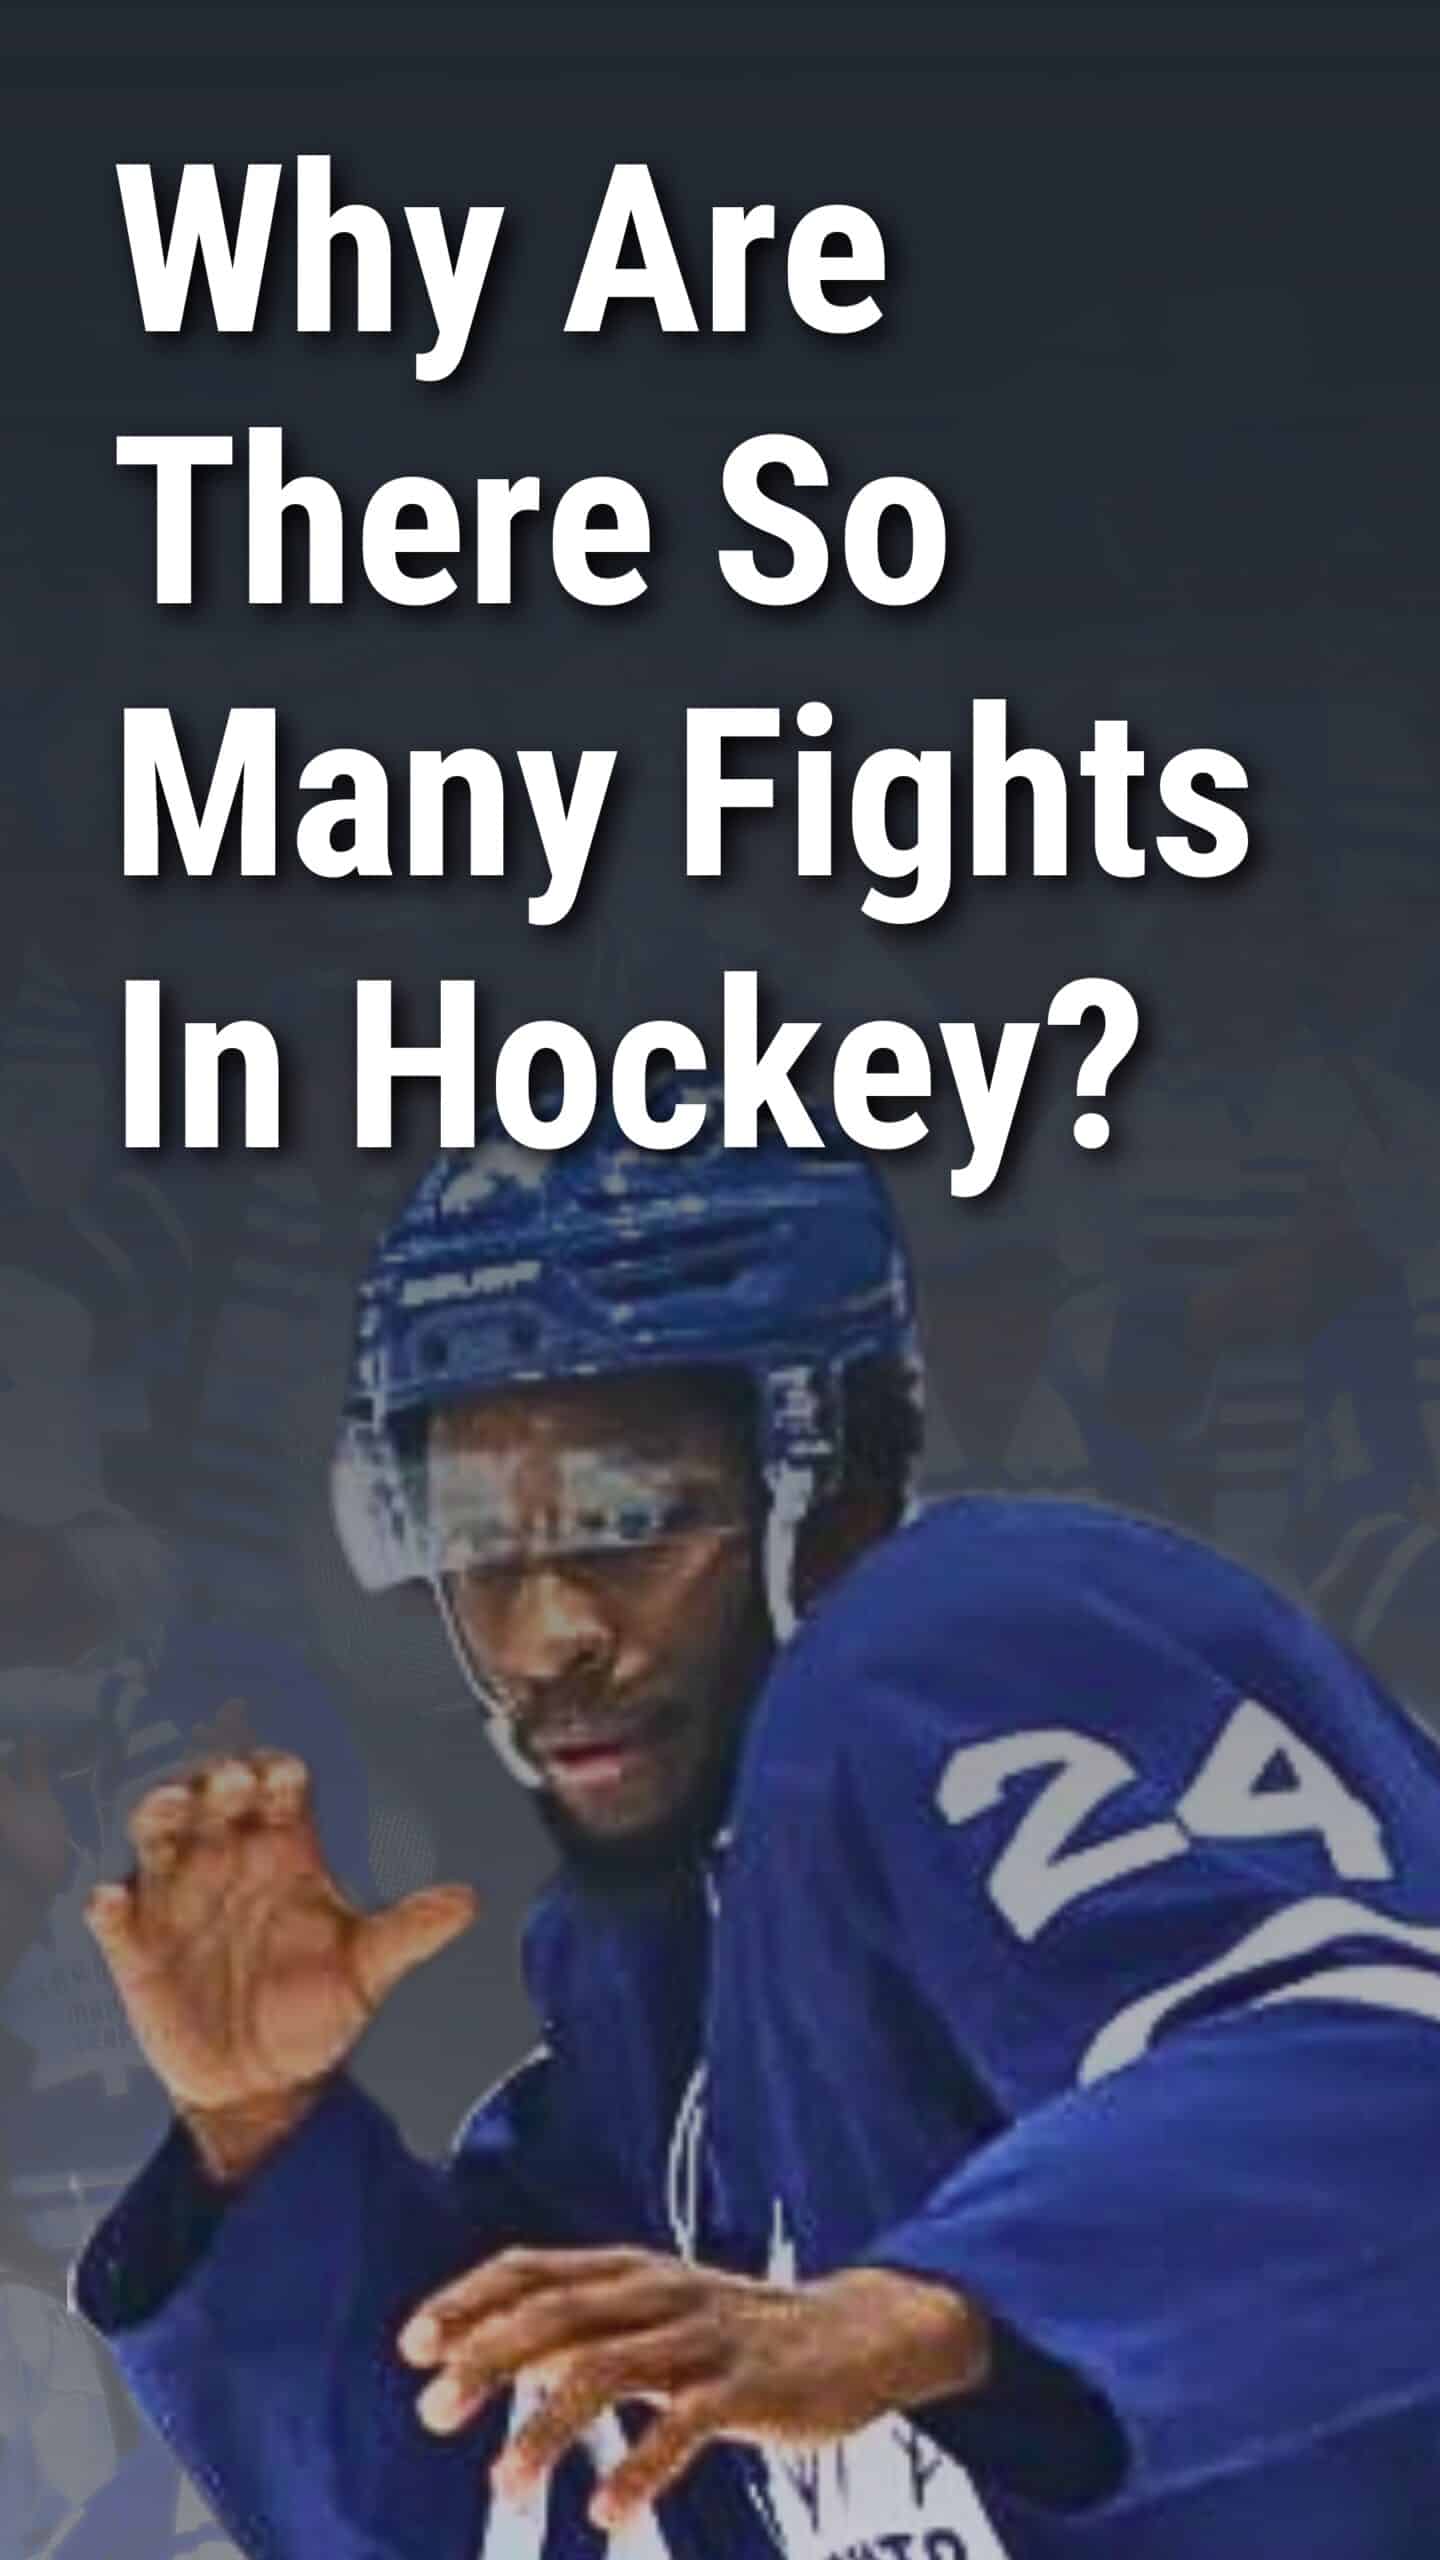 Why Are There So Many Fights In Hockey?